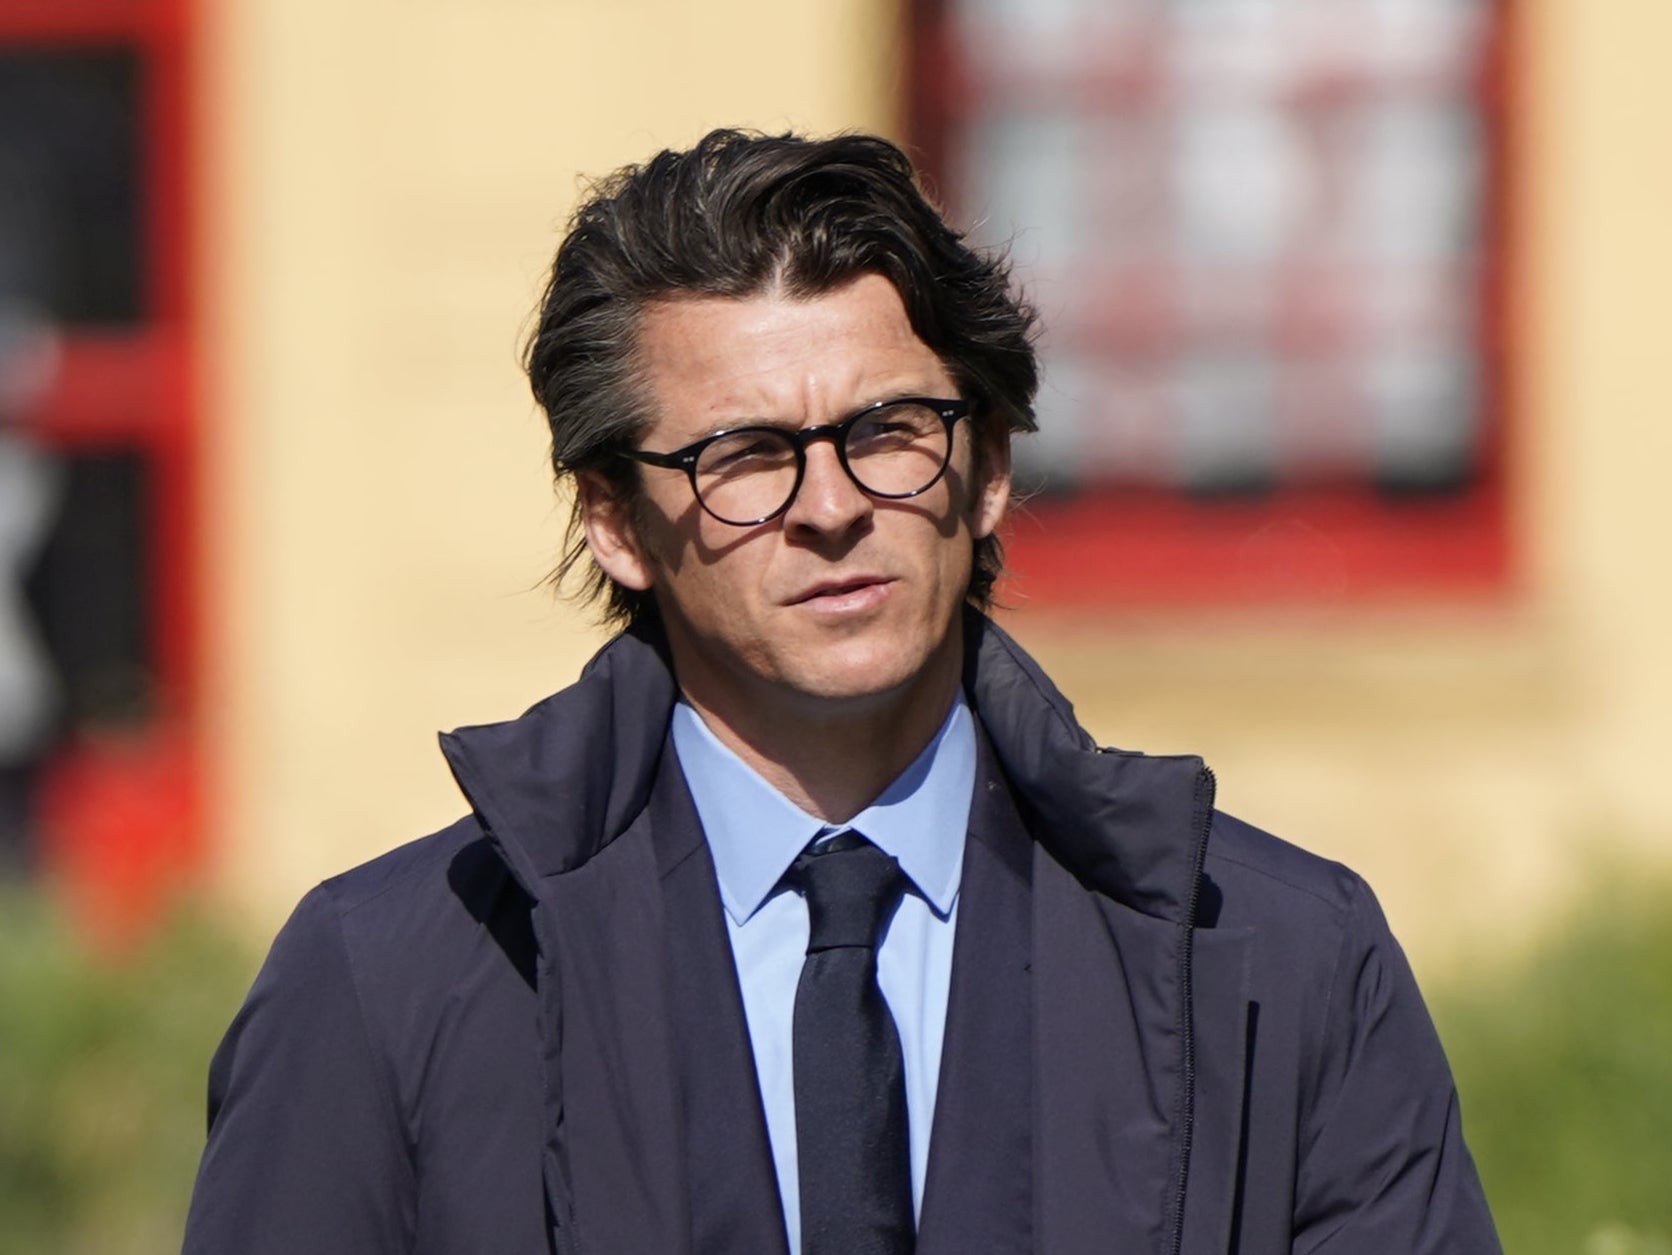 Joey Barton arriving at Sheffield Crown Court where he is charged with causing actual bodily harm to the then Barnsley manager Daniel Stendel in April 2019